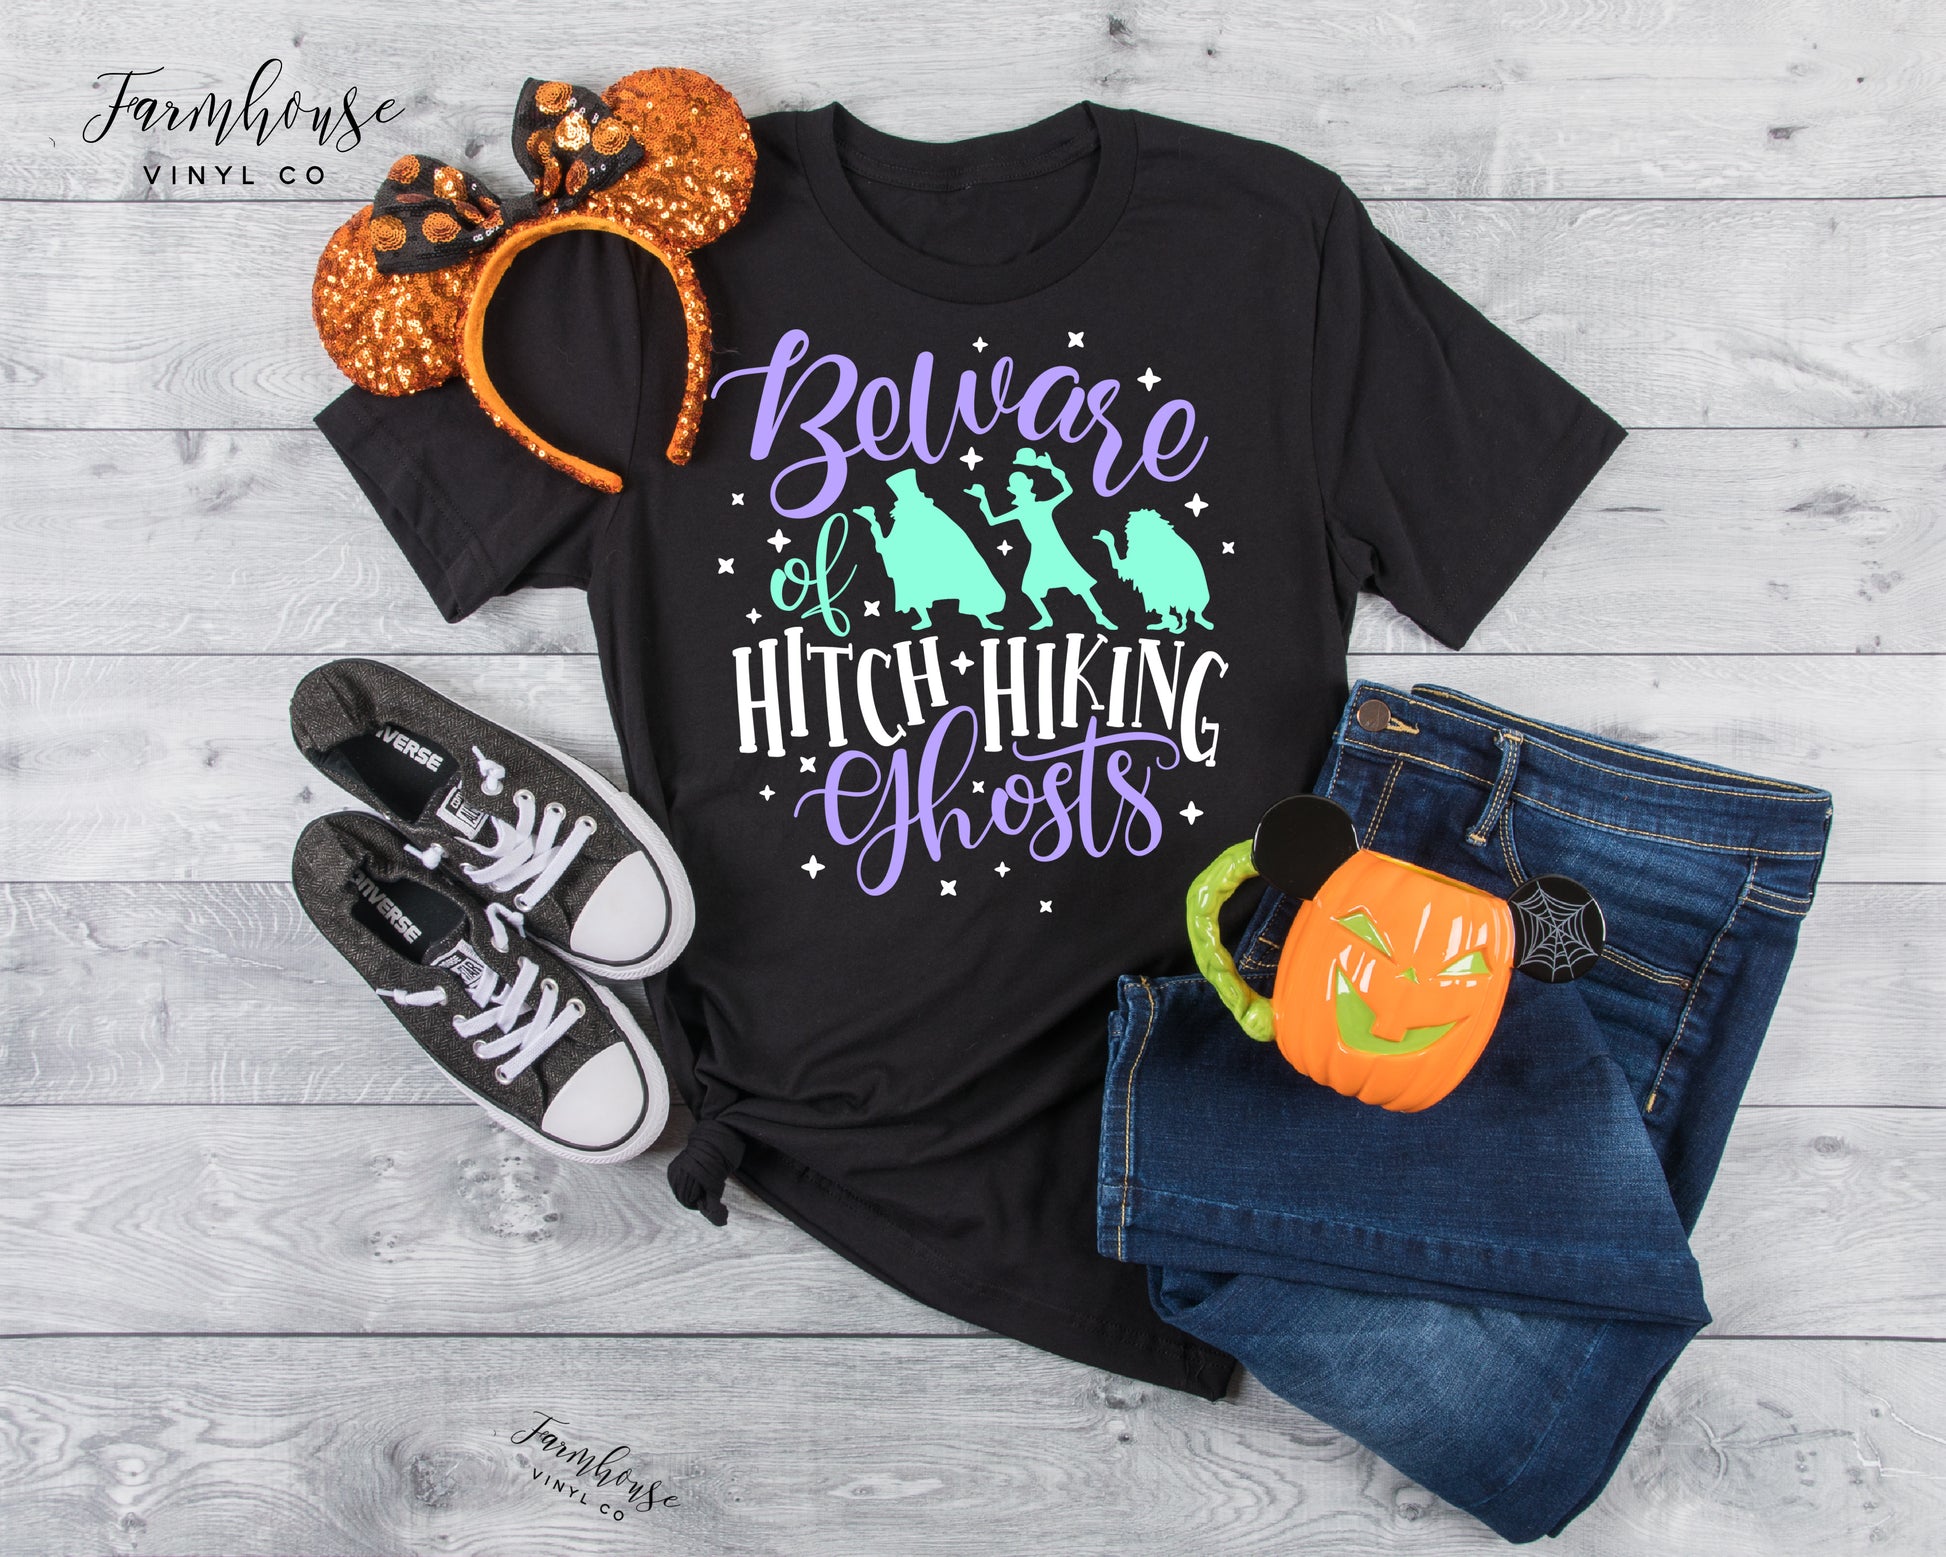 Haunted Mansion Beware of Hitch Hiking Ghosts Shirt - Farmhouse Vinyl Co